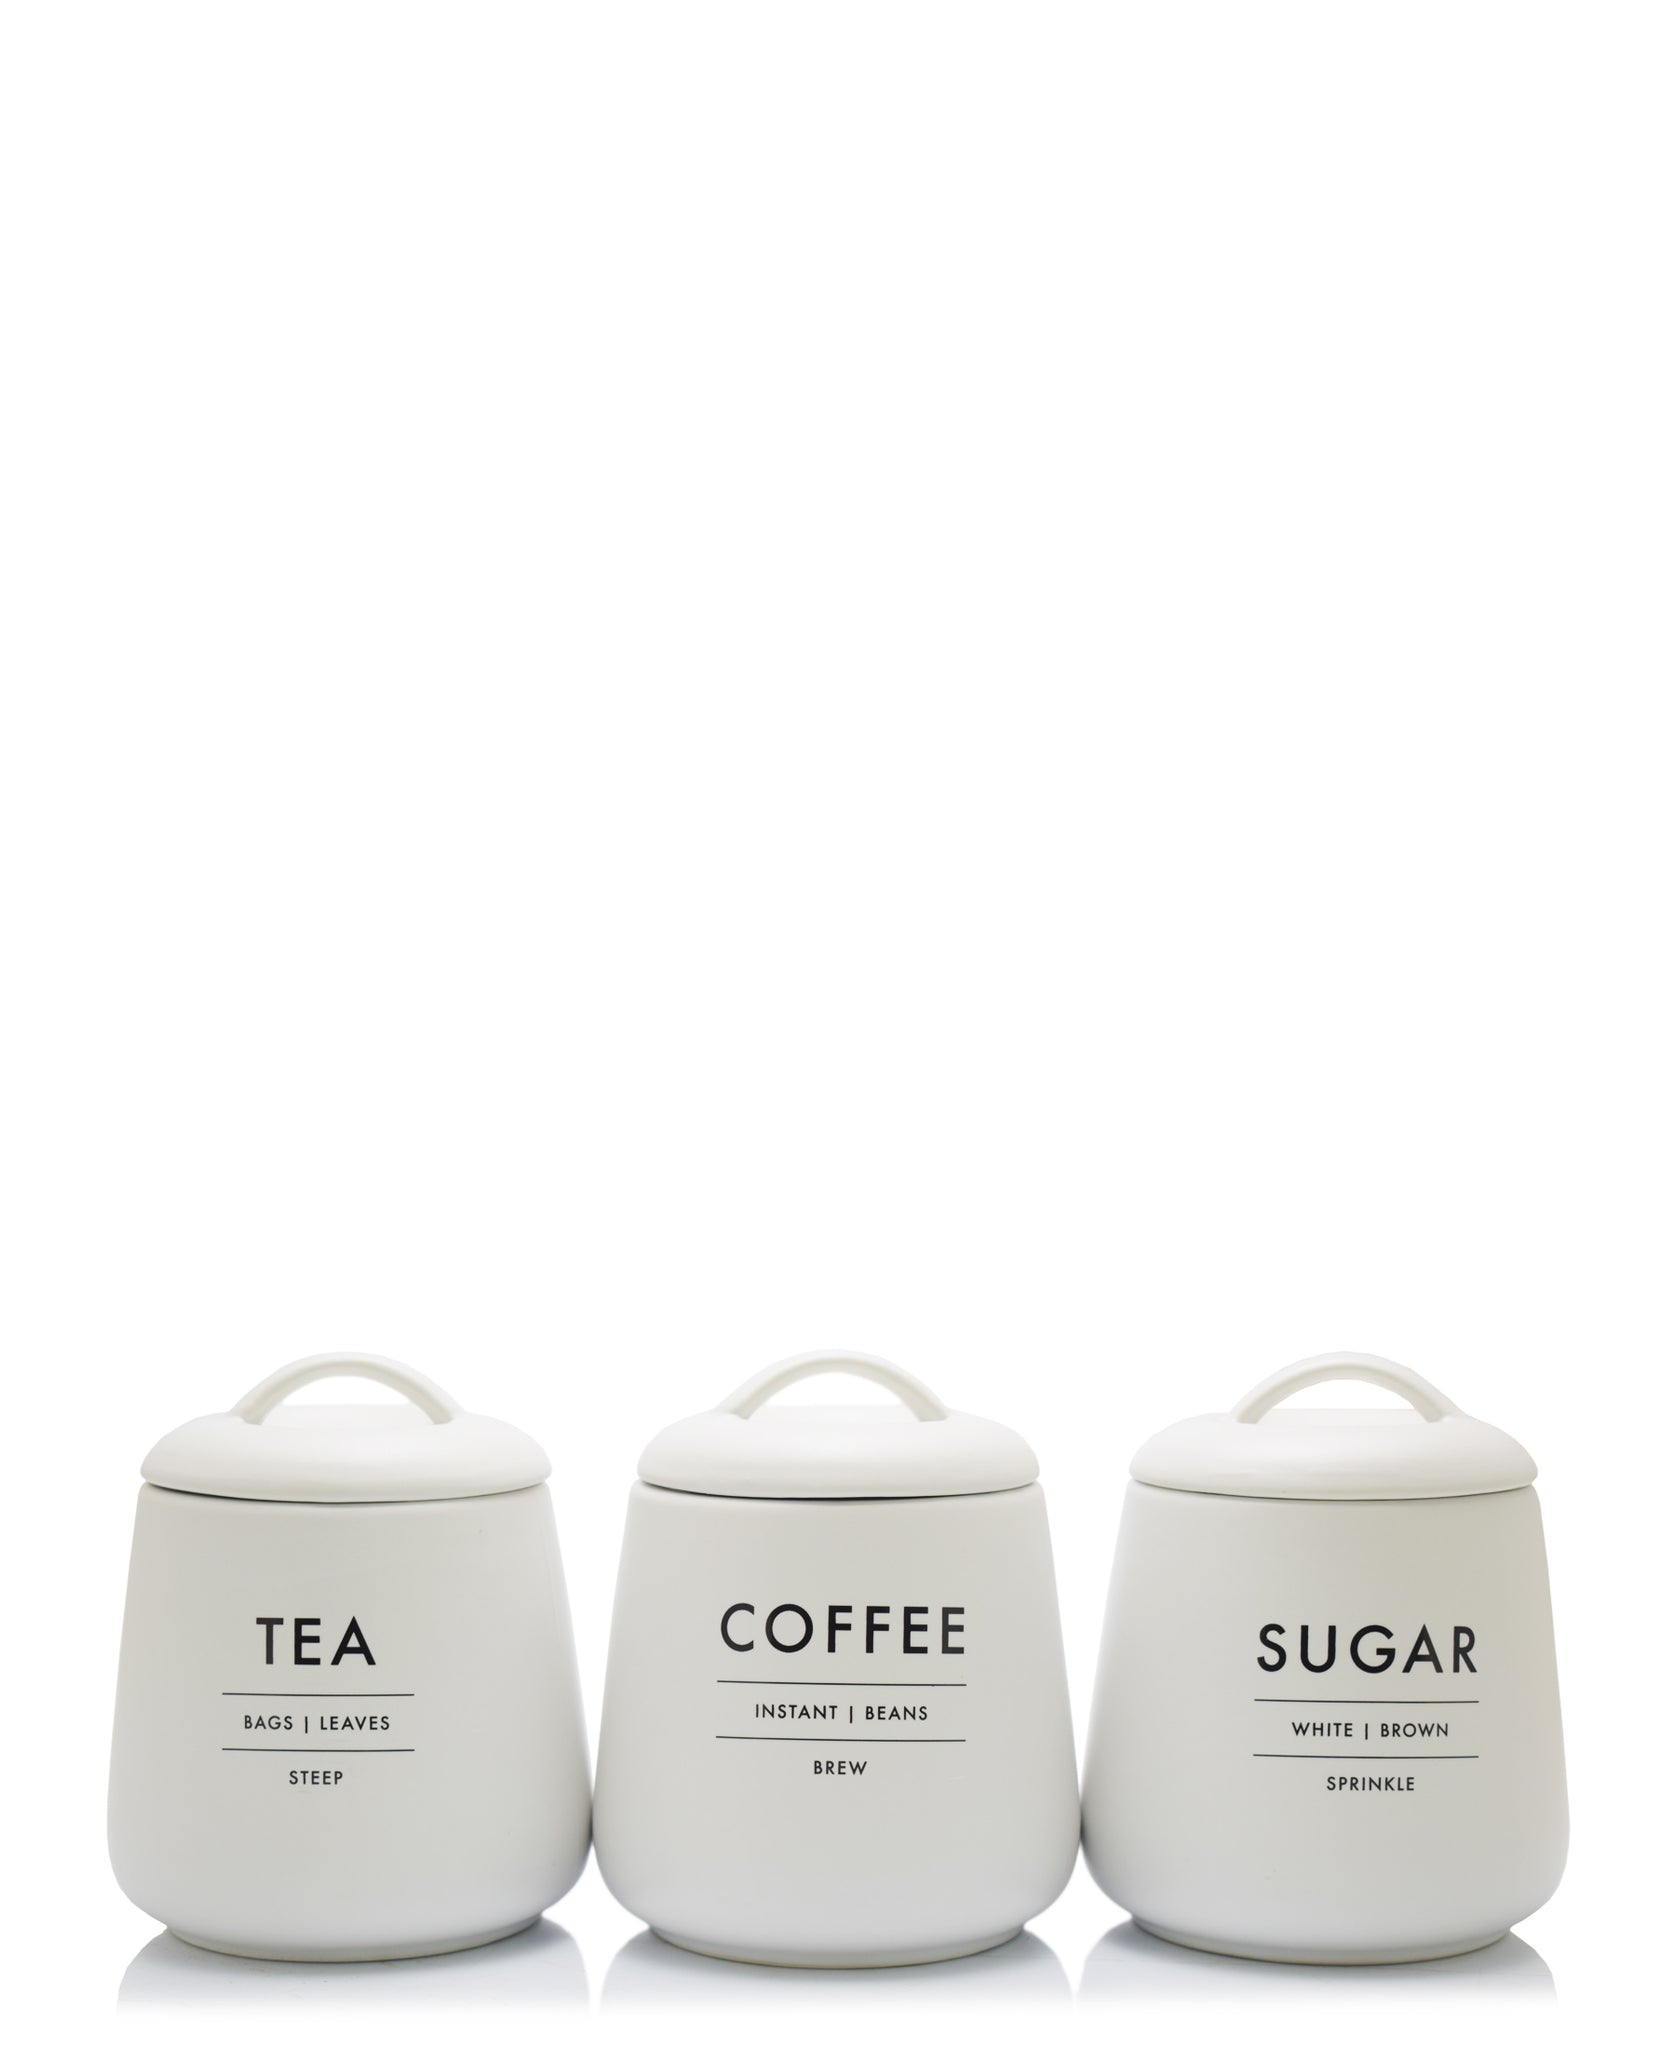 Eetrite 3 Piece Stoneware Canisters - White